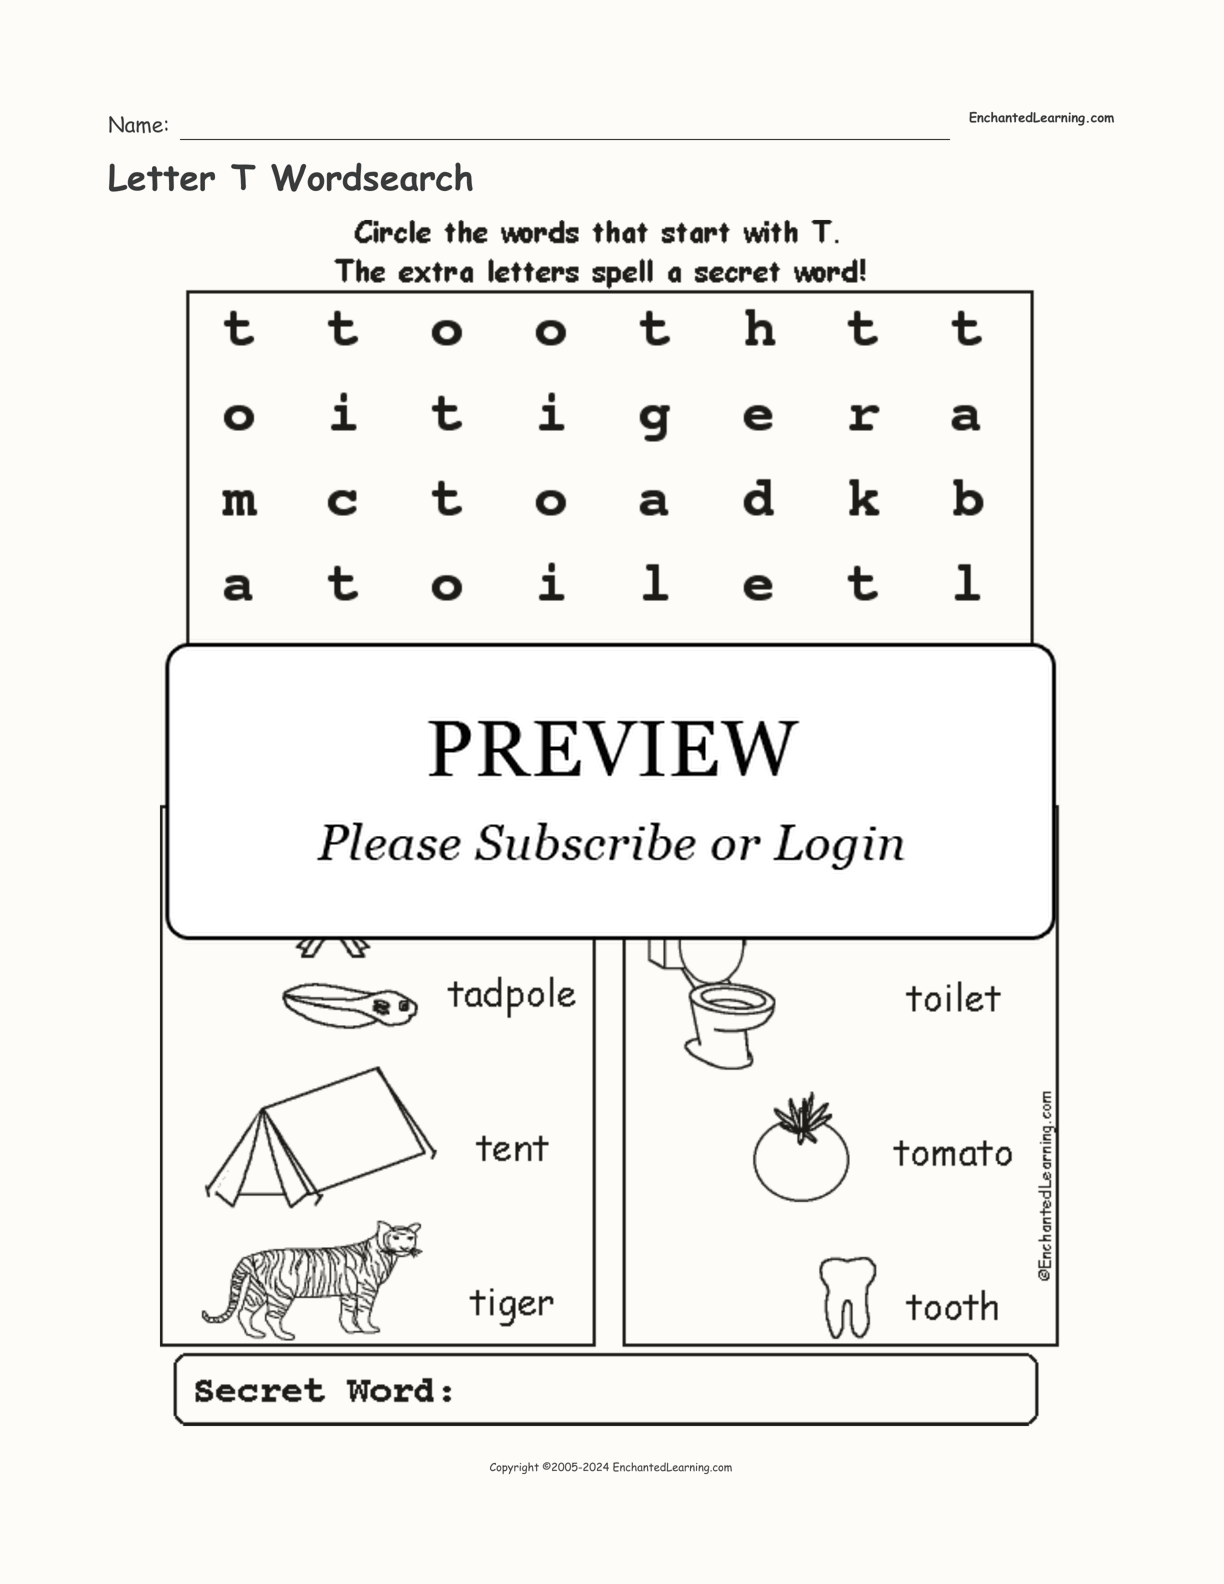 Letter T Wordsearch interactive worksheet page 1